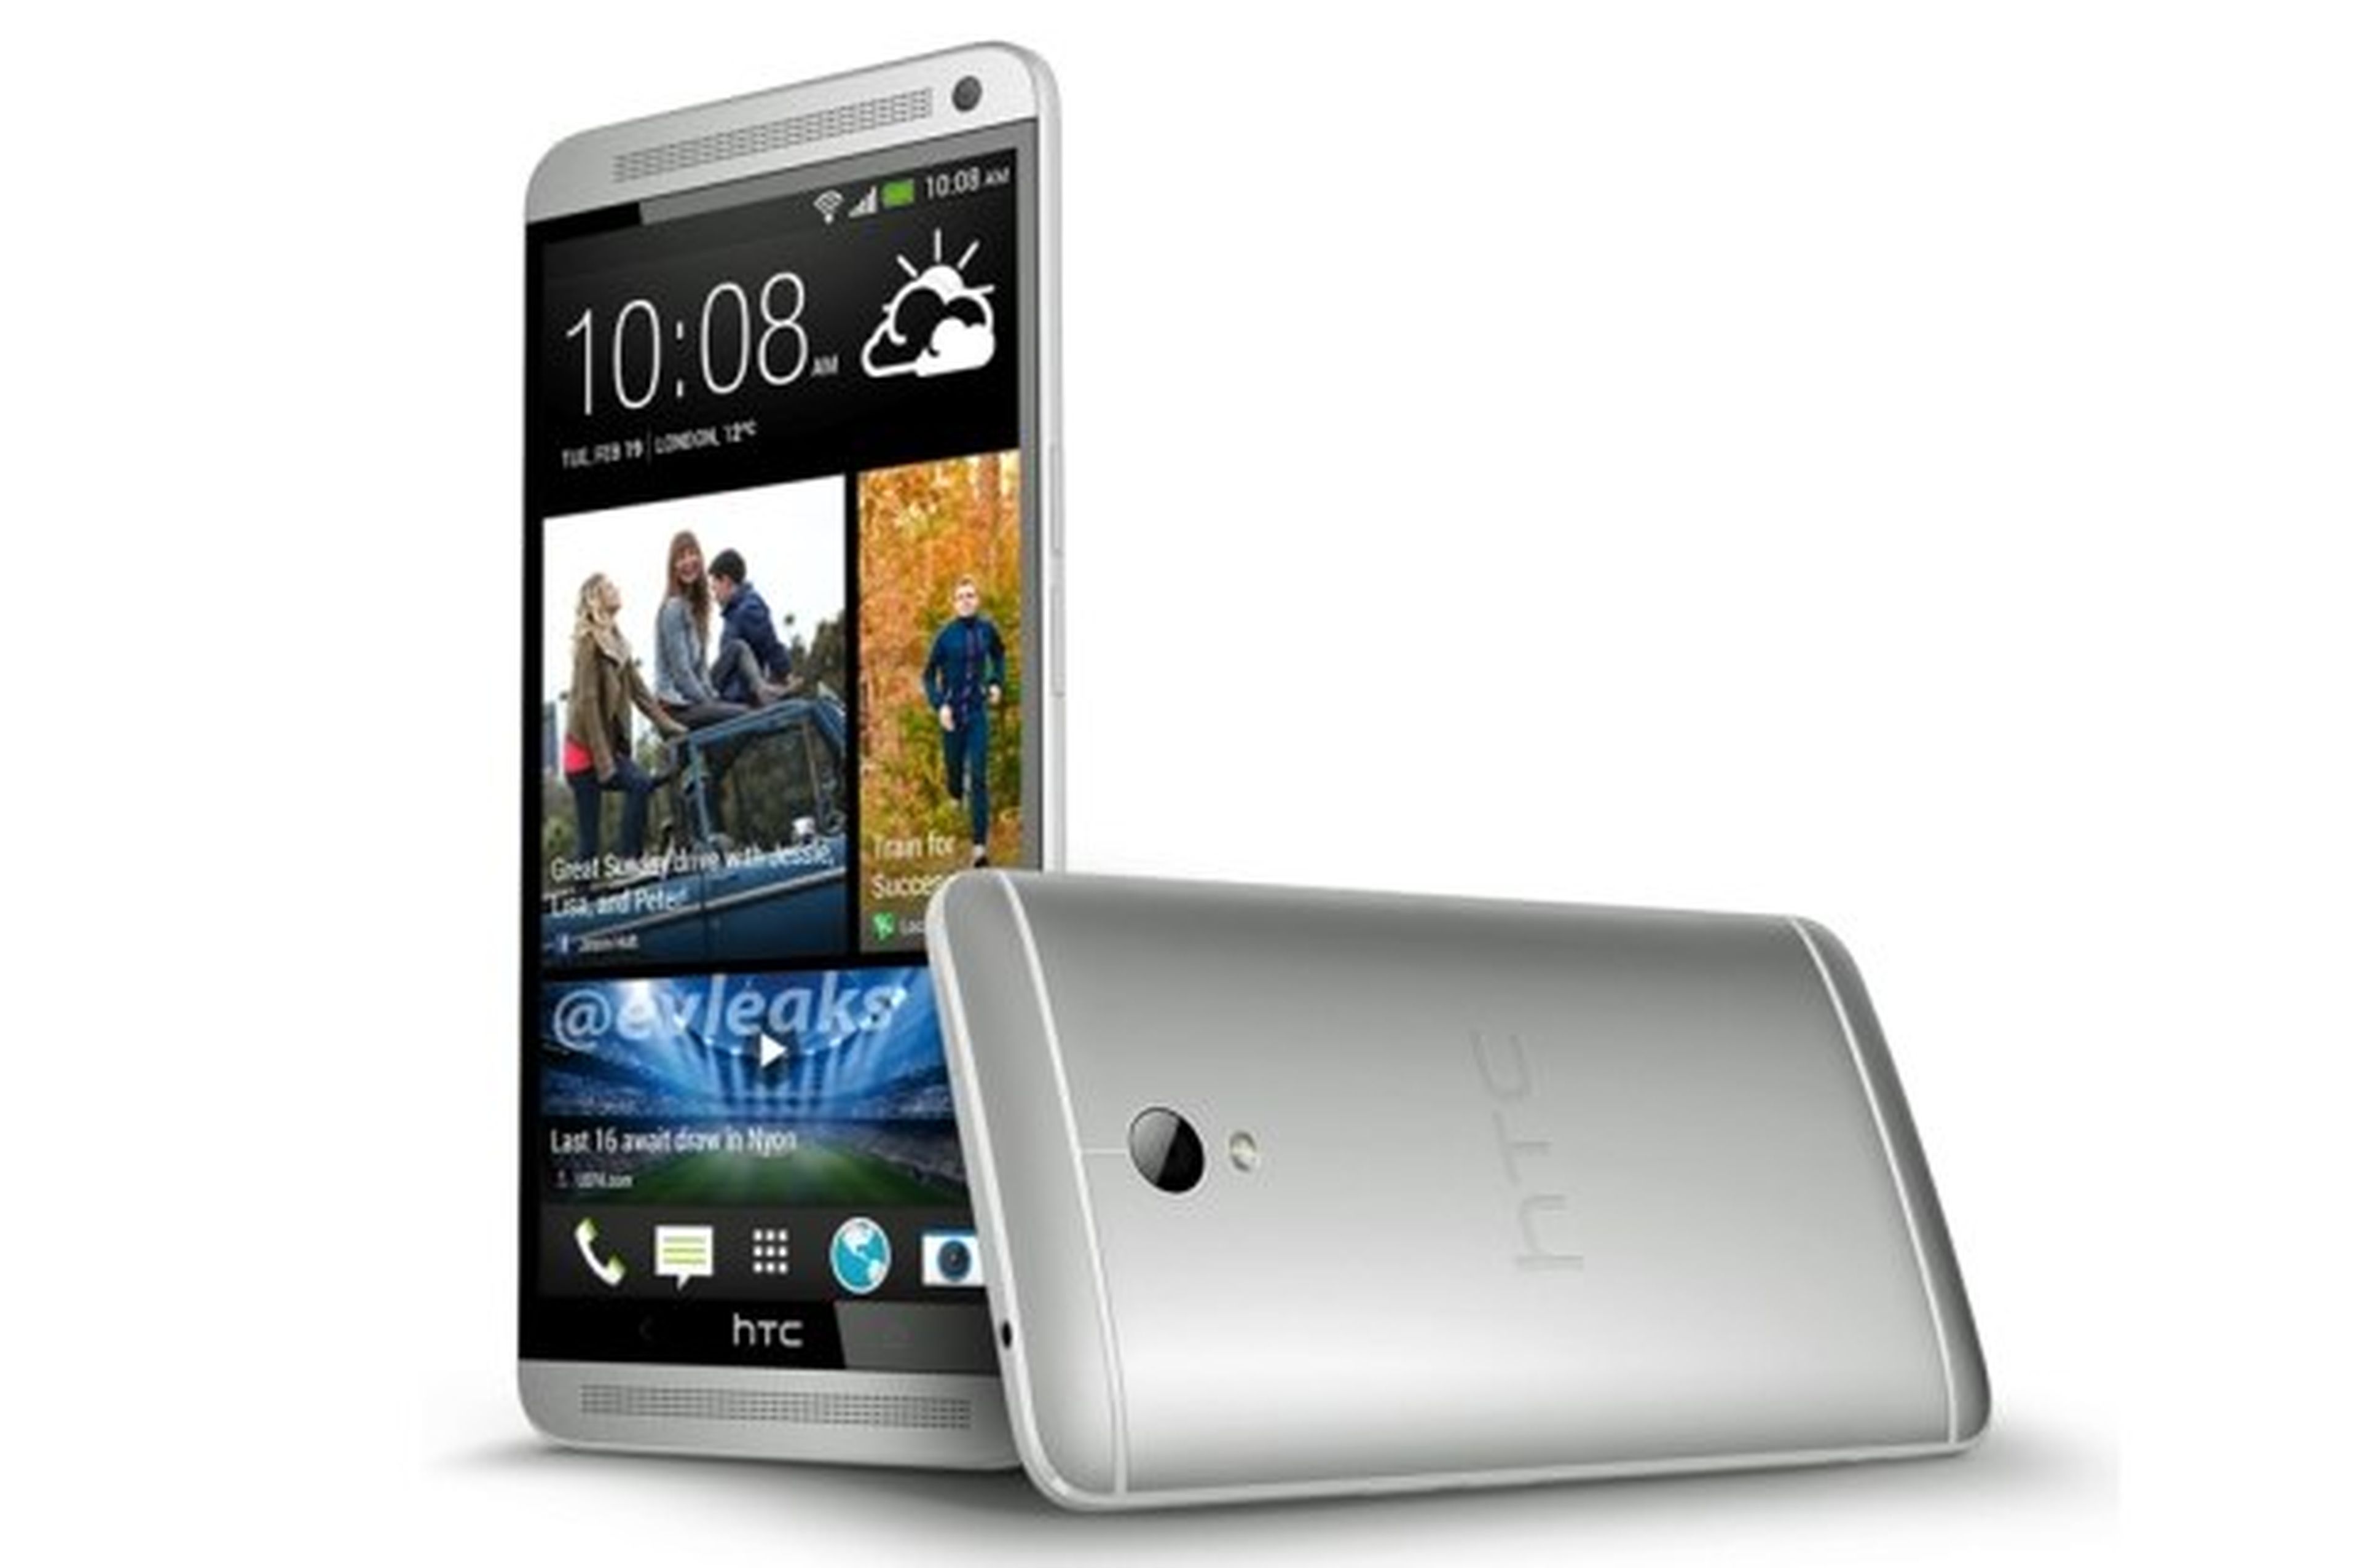 render no oficial HTC One Max